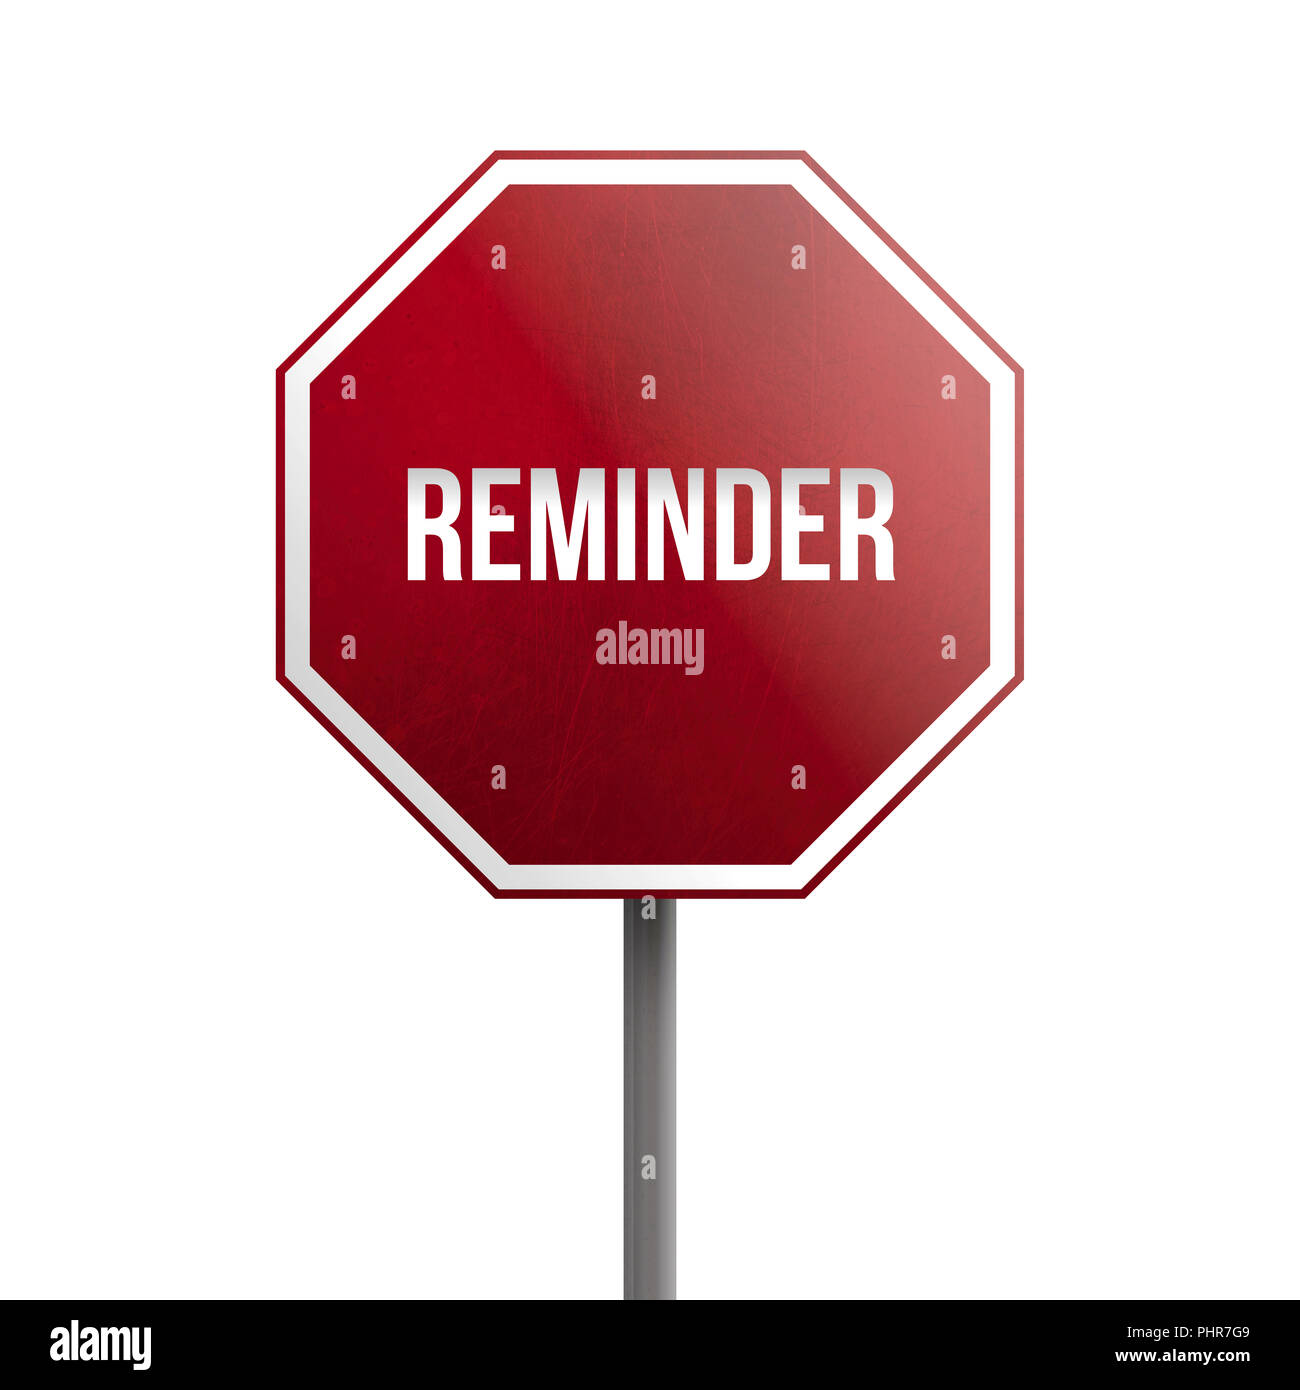 Reminder - red sign isolated on white background Stock Photo